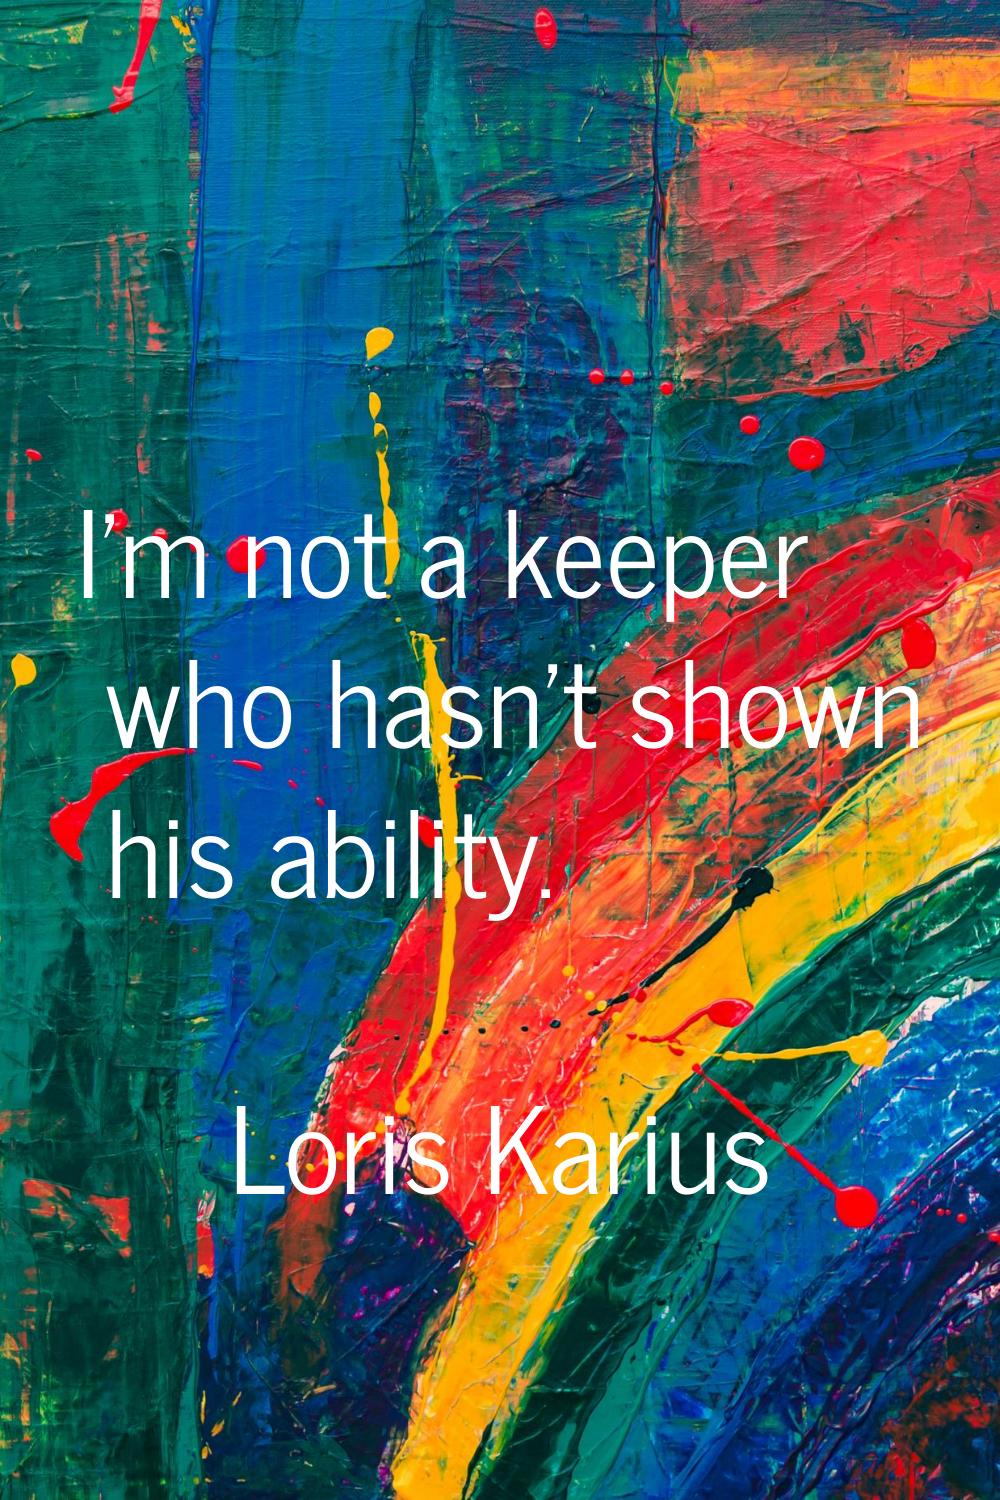 I'm not a keeper who hasn't shown his ability.